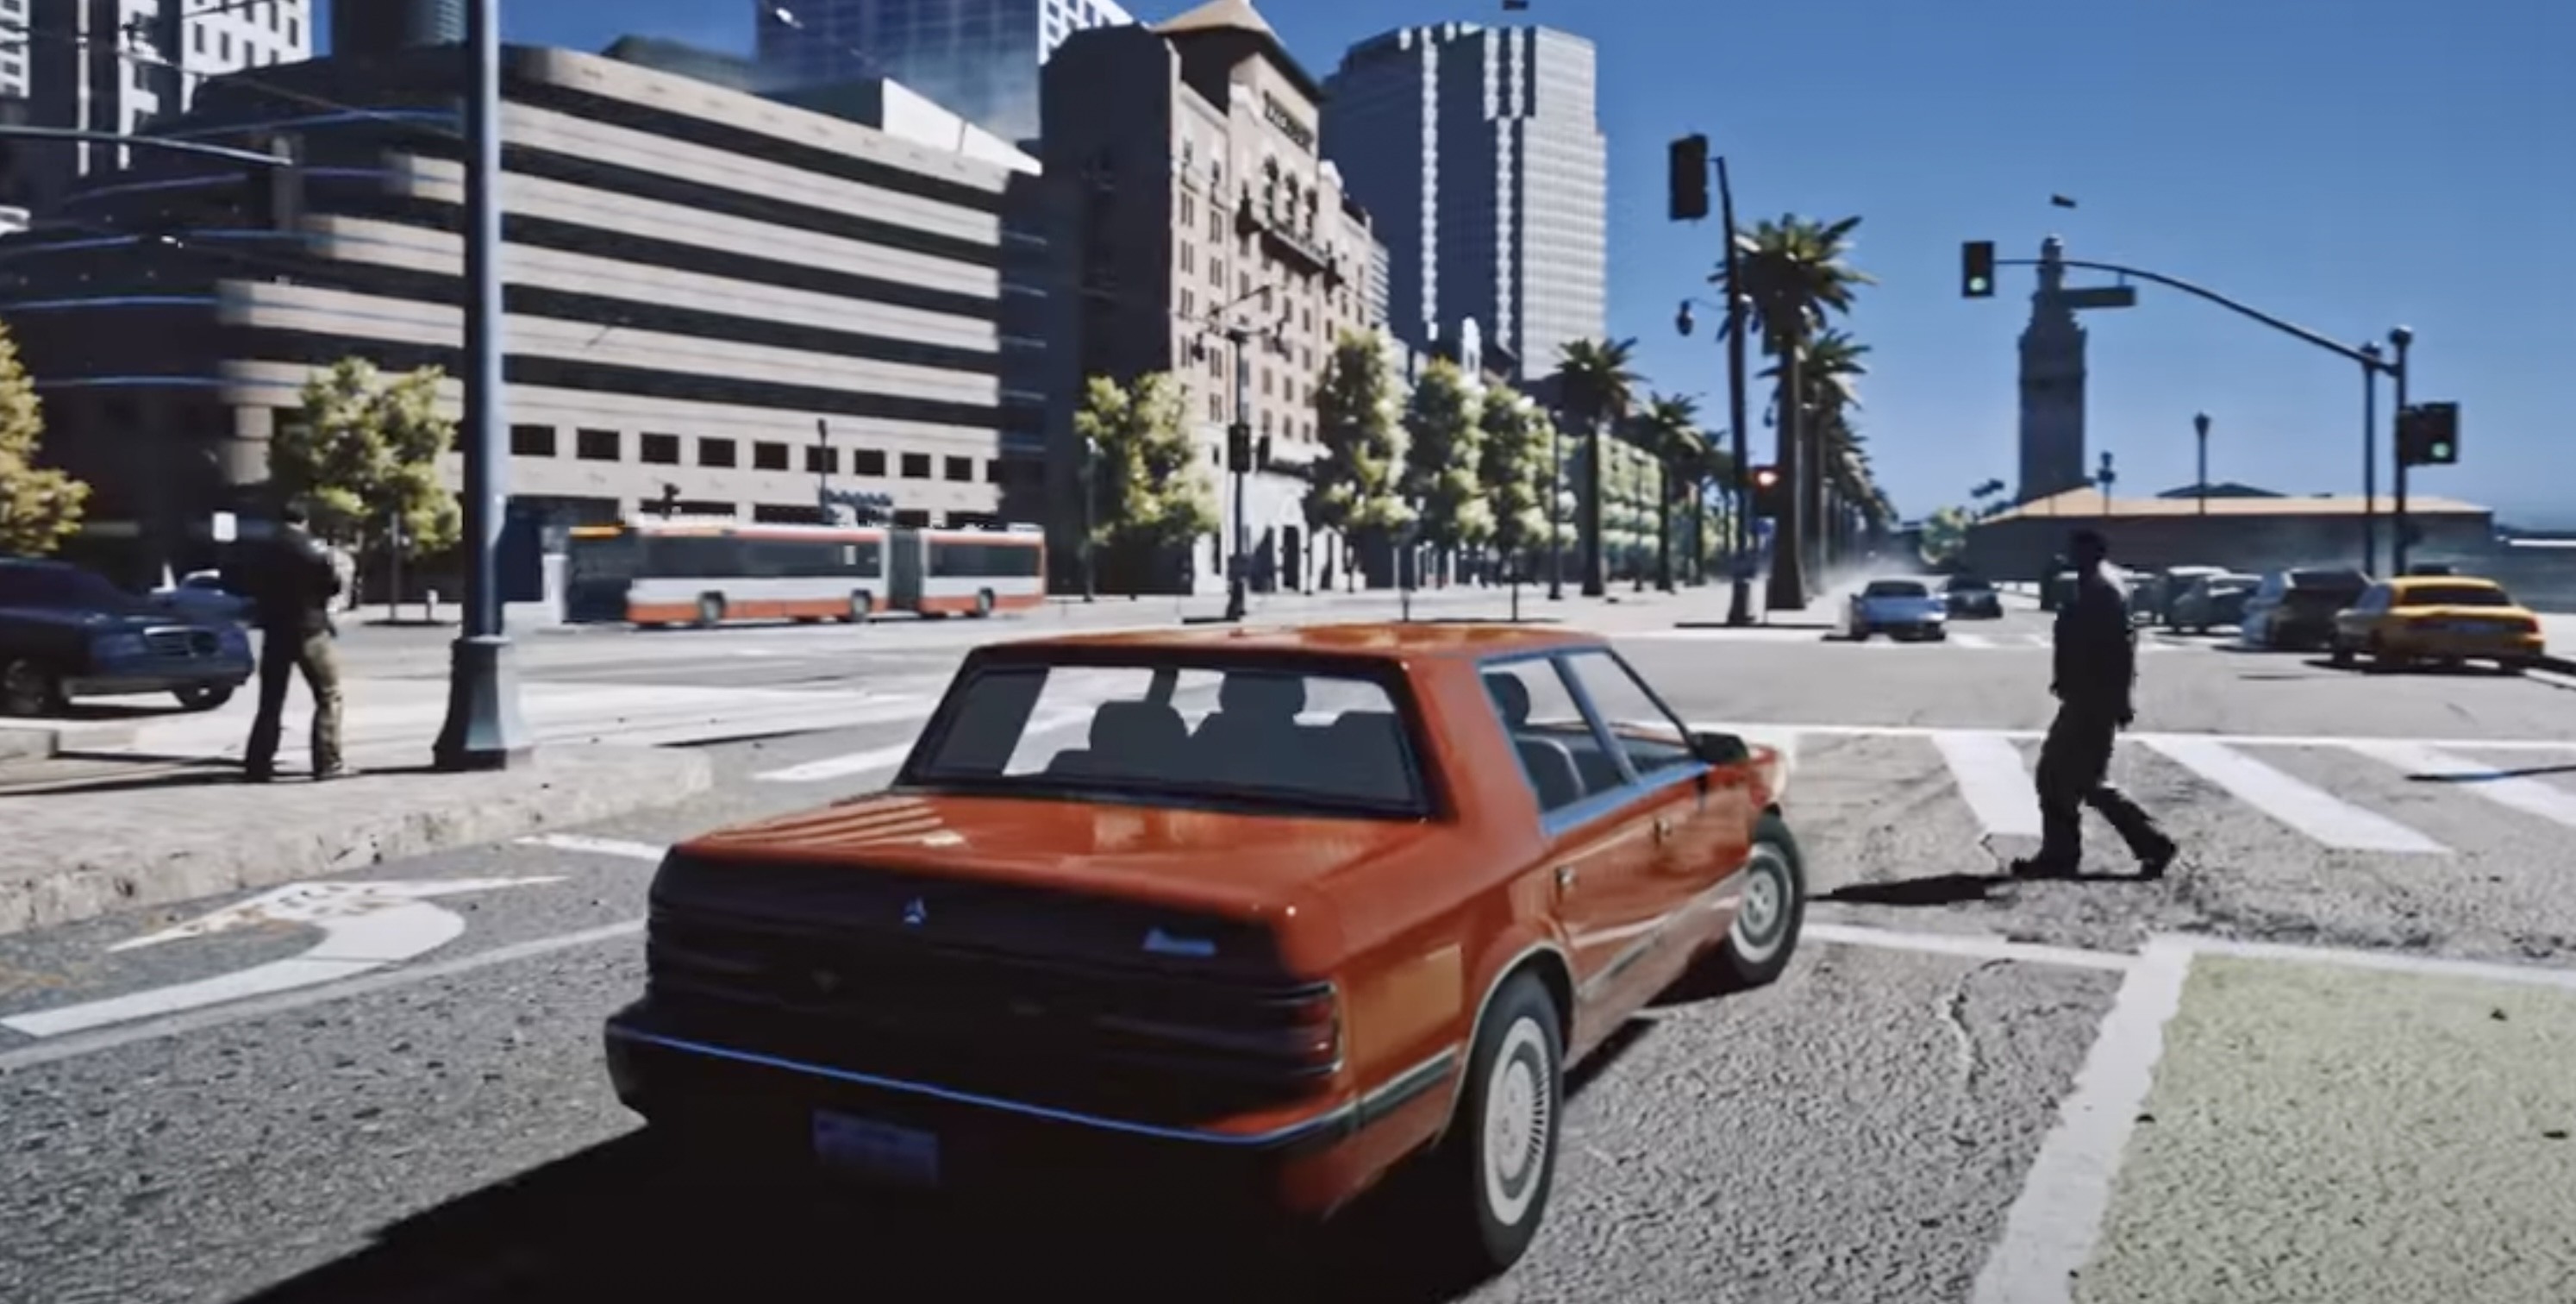 GTA 6 Concept Created in Unreal Engine 5 Looks Surreal, Hopefully